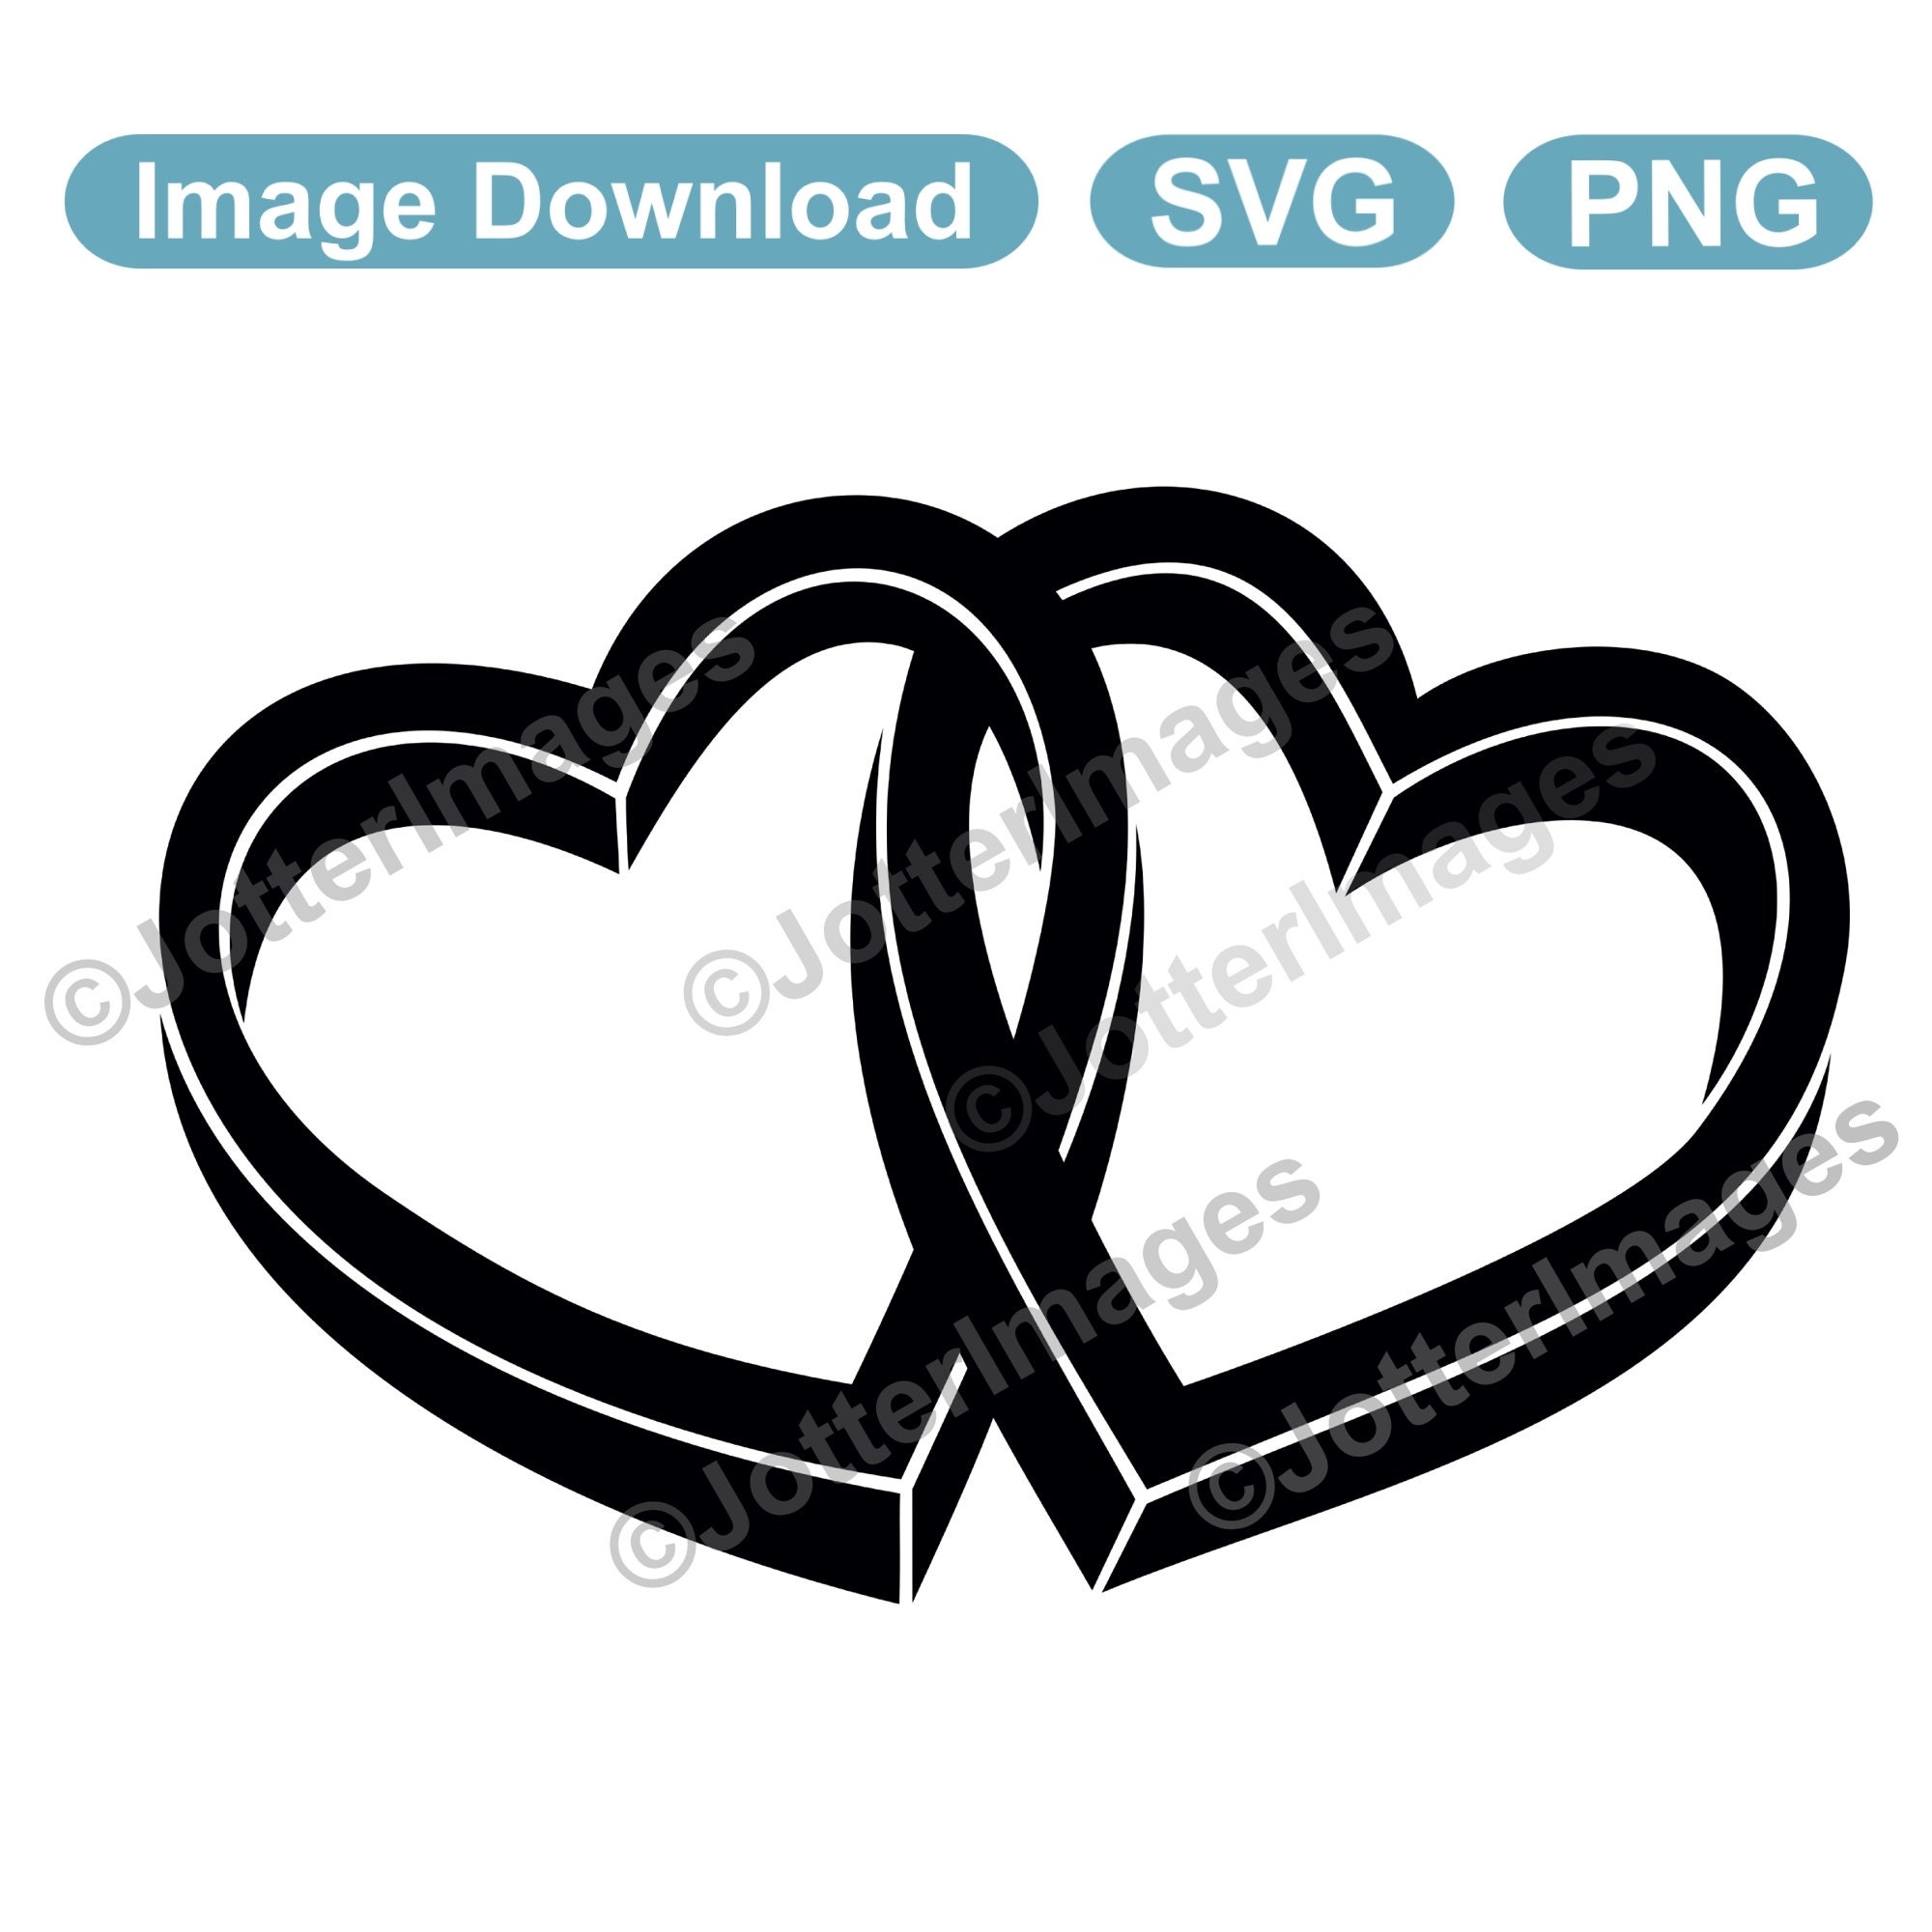 Victoria Lynn Transparent Double Heart Stickers - 53 count - CutCardStock